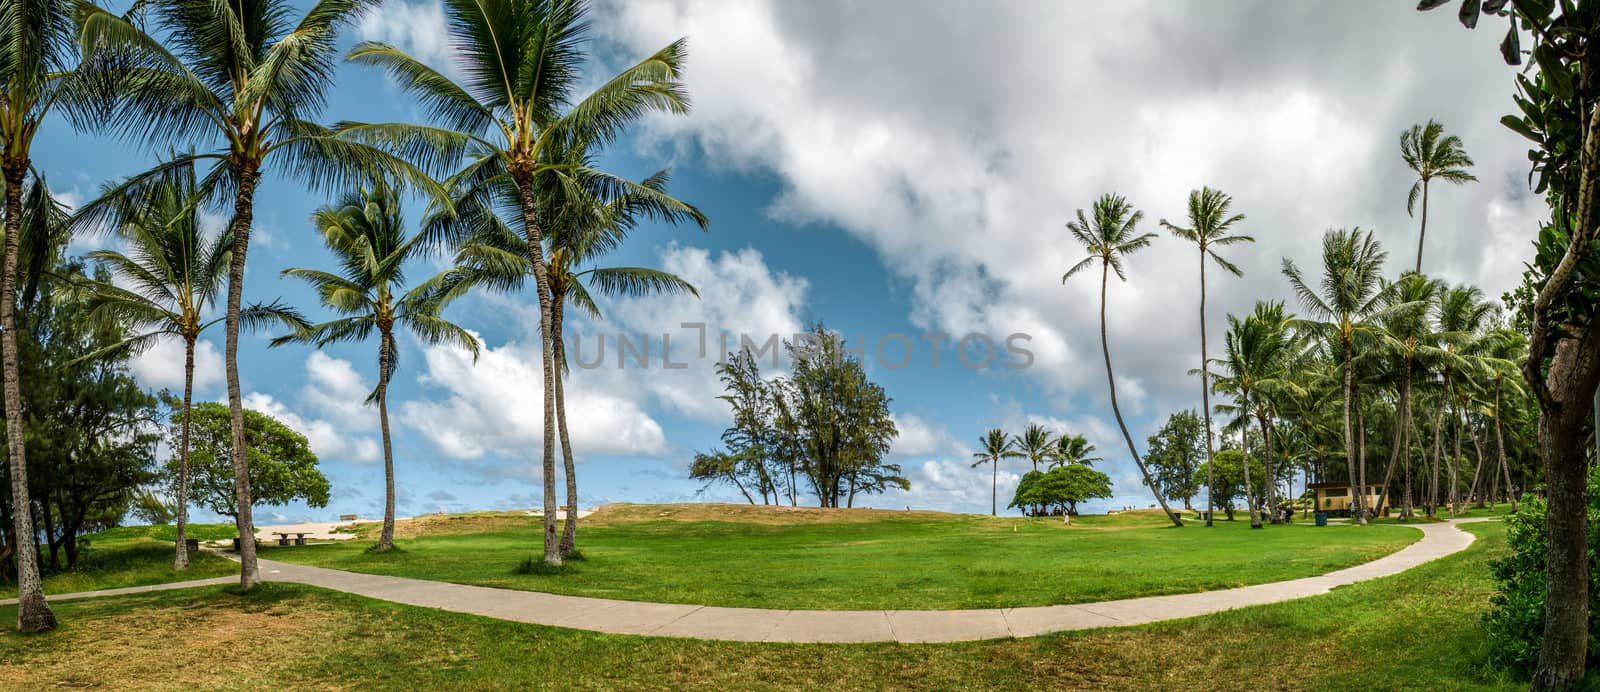 Grass beatch at Hawaii by mikelju